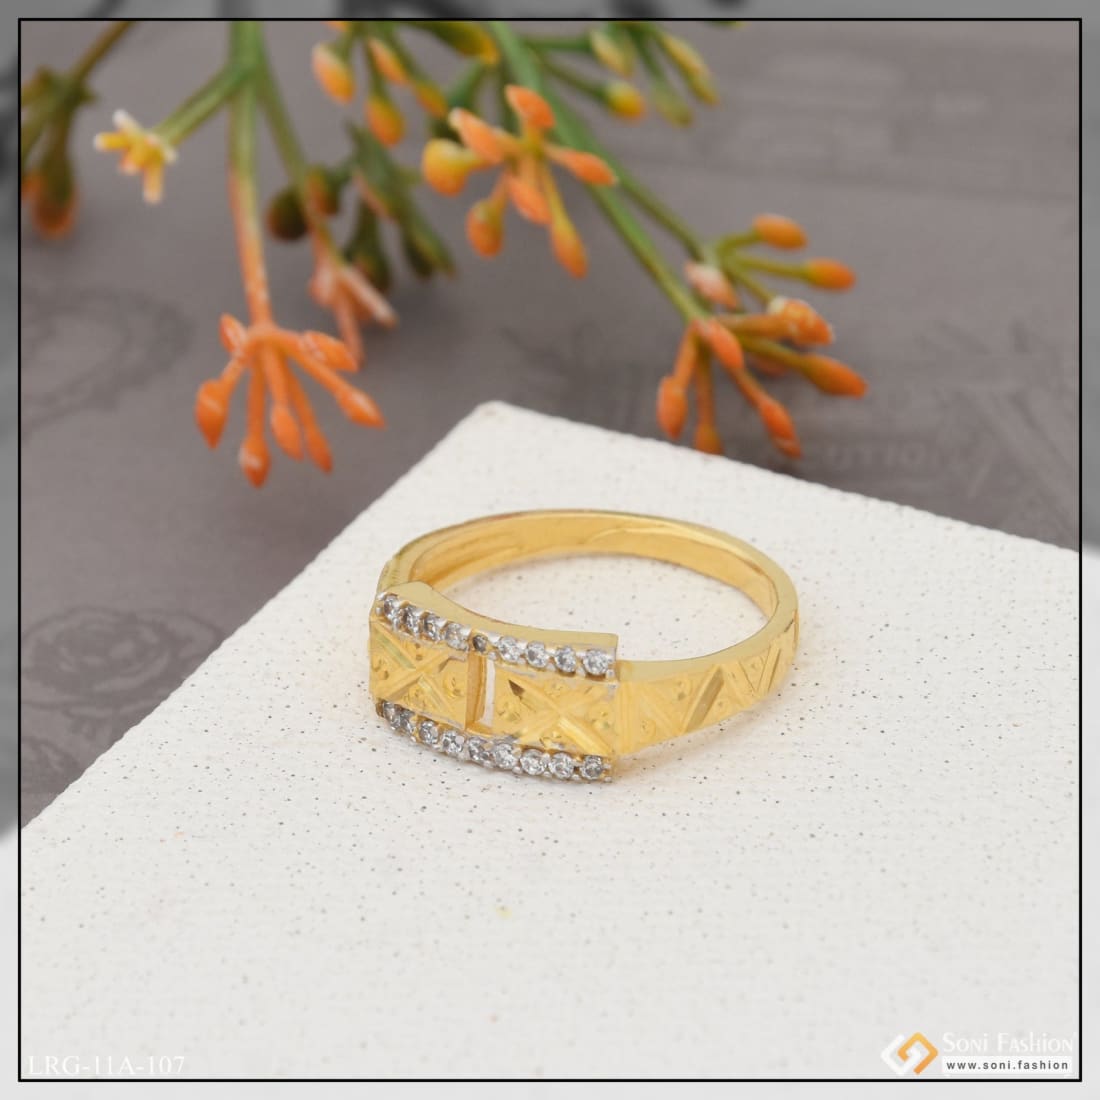 1 Gram Gold Forming Superior Quality Hand-crafted Design Ring For Men -  Style B019 at Rs 2240.00 | Rajkot| ID: 2850339419062